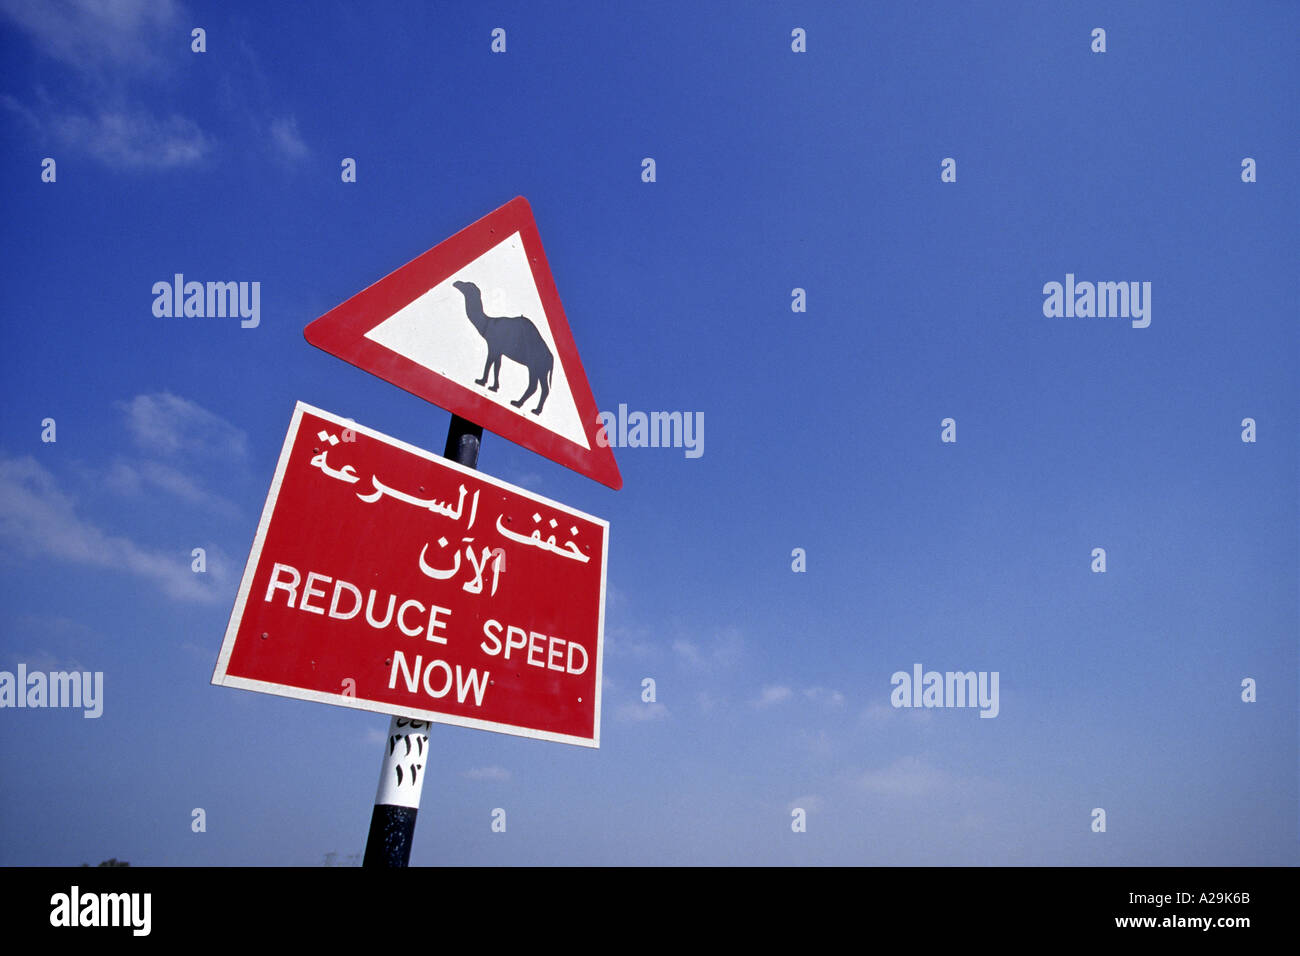 Reduce Speed Now road sign at Nad Al Sheba Camel Racing Track in Dubai Stock Photo